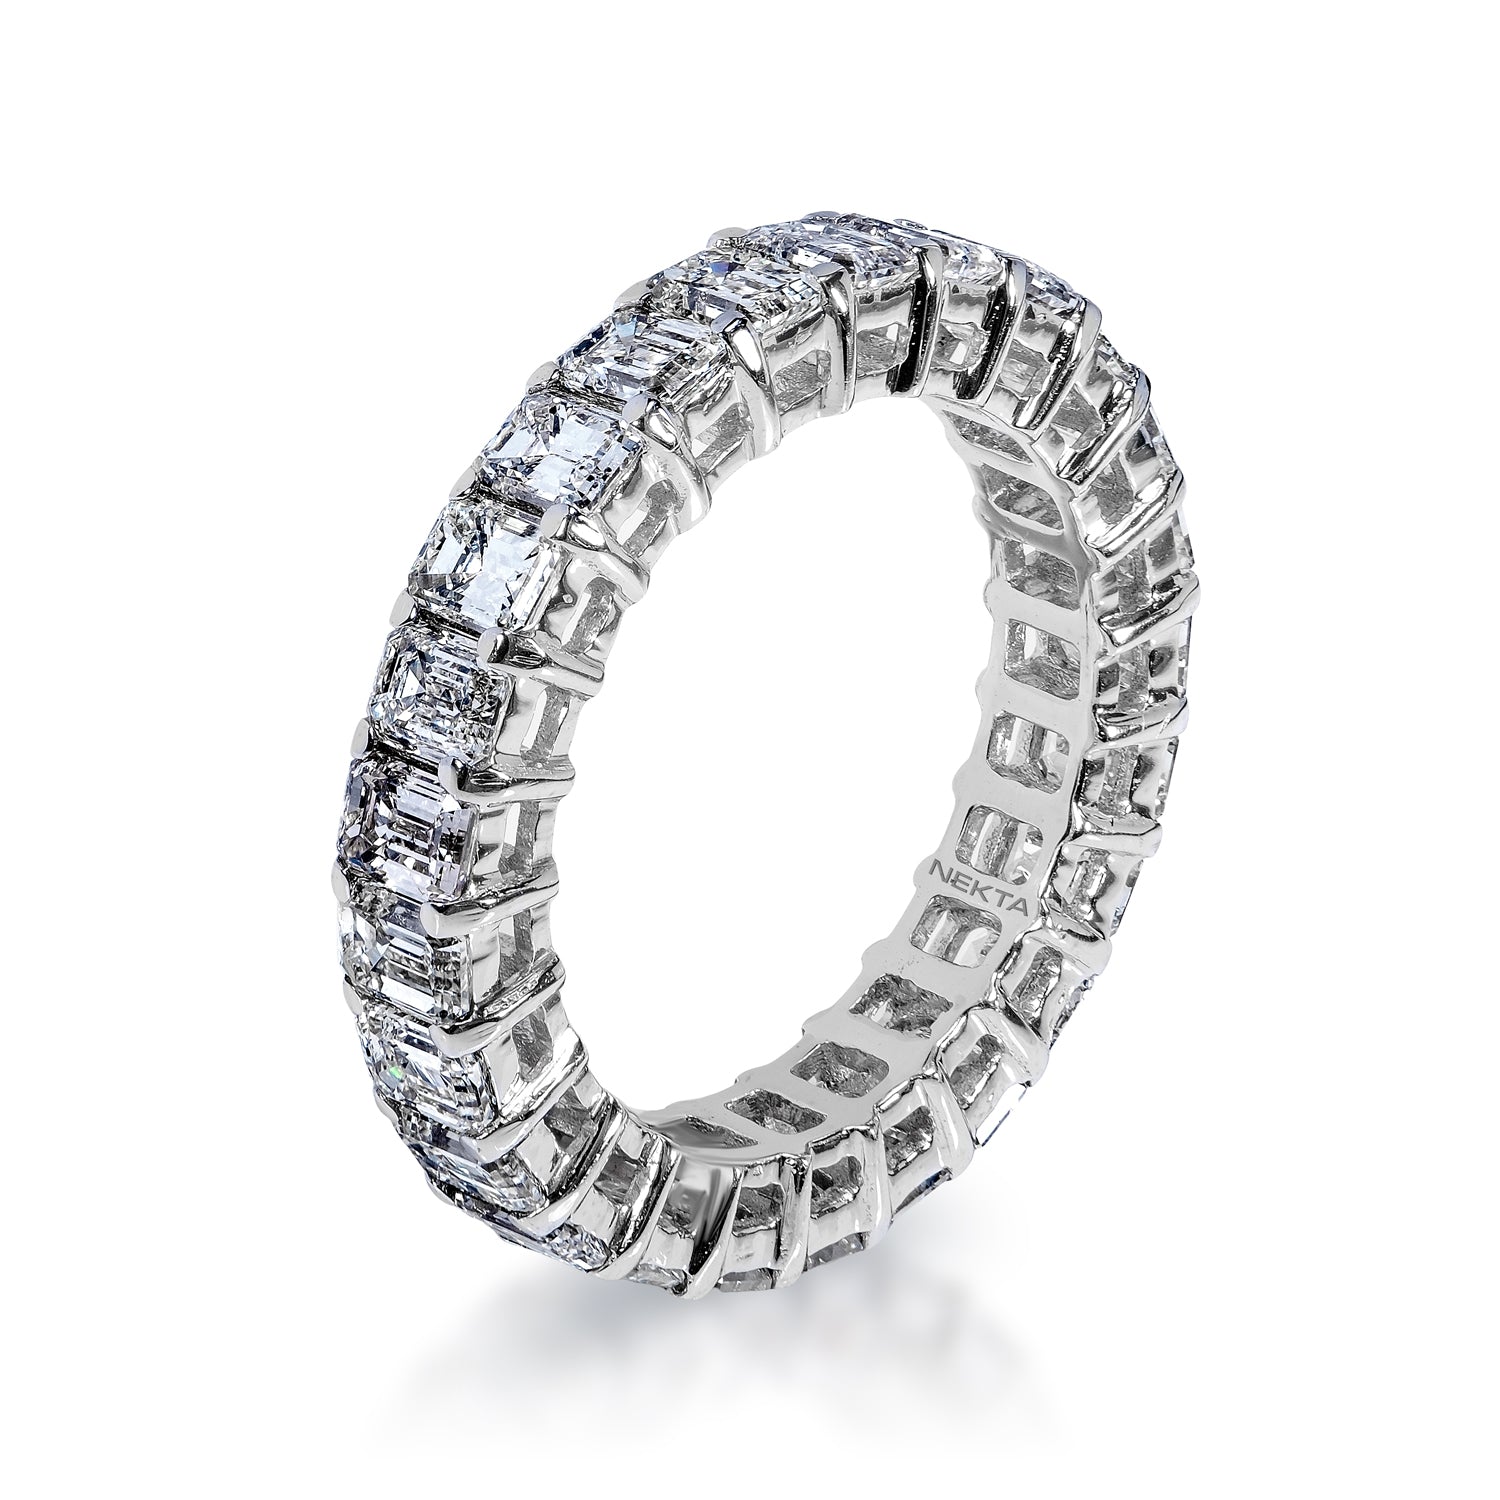 Brinley 4 Carat Emerald Cut Diamond Eternity Band in 14k White Gold Shared Prong Side View